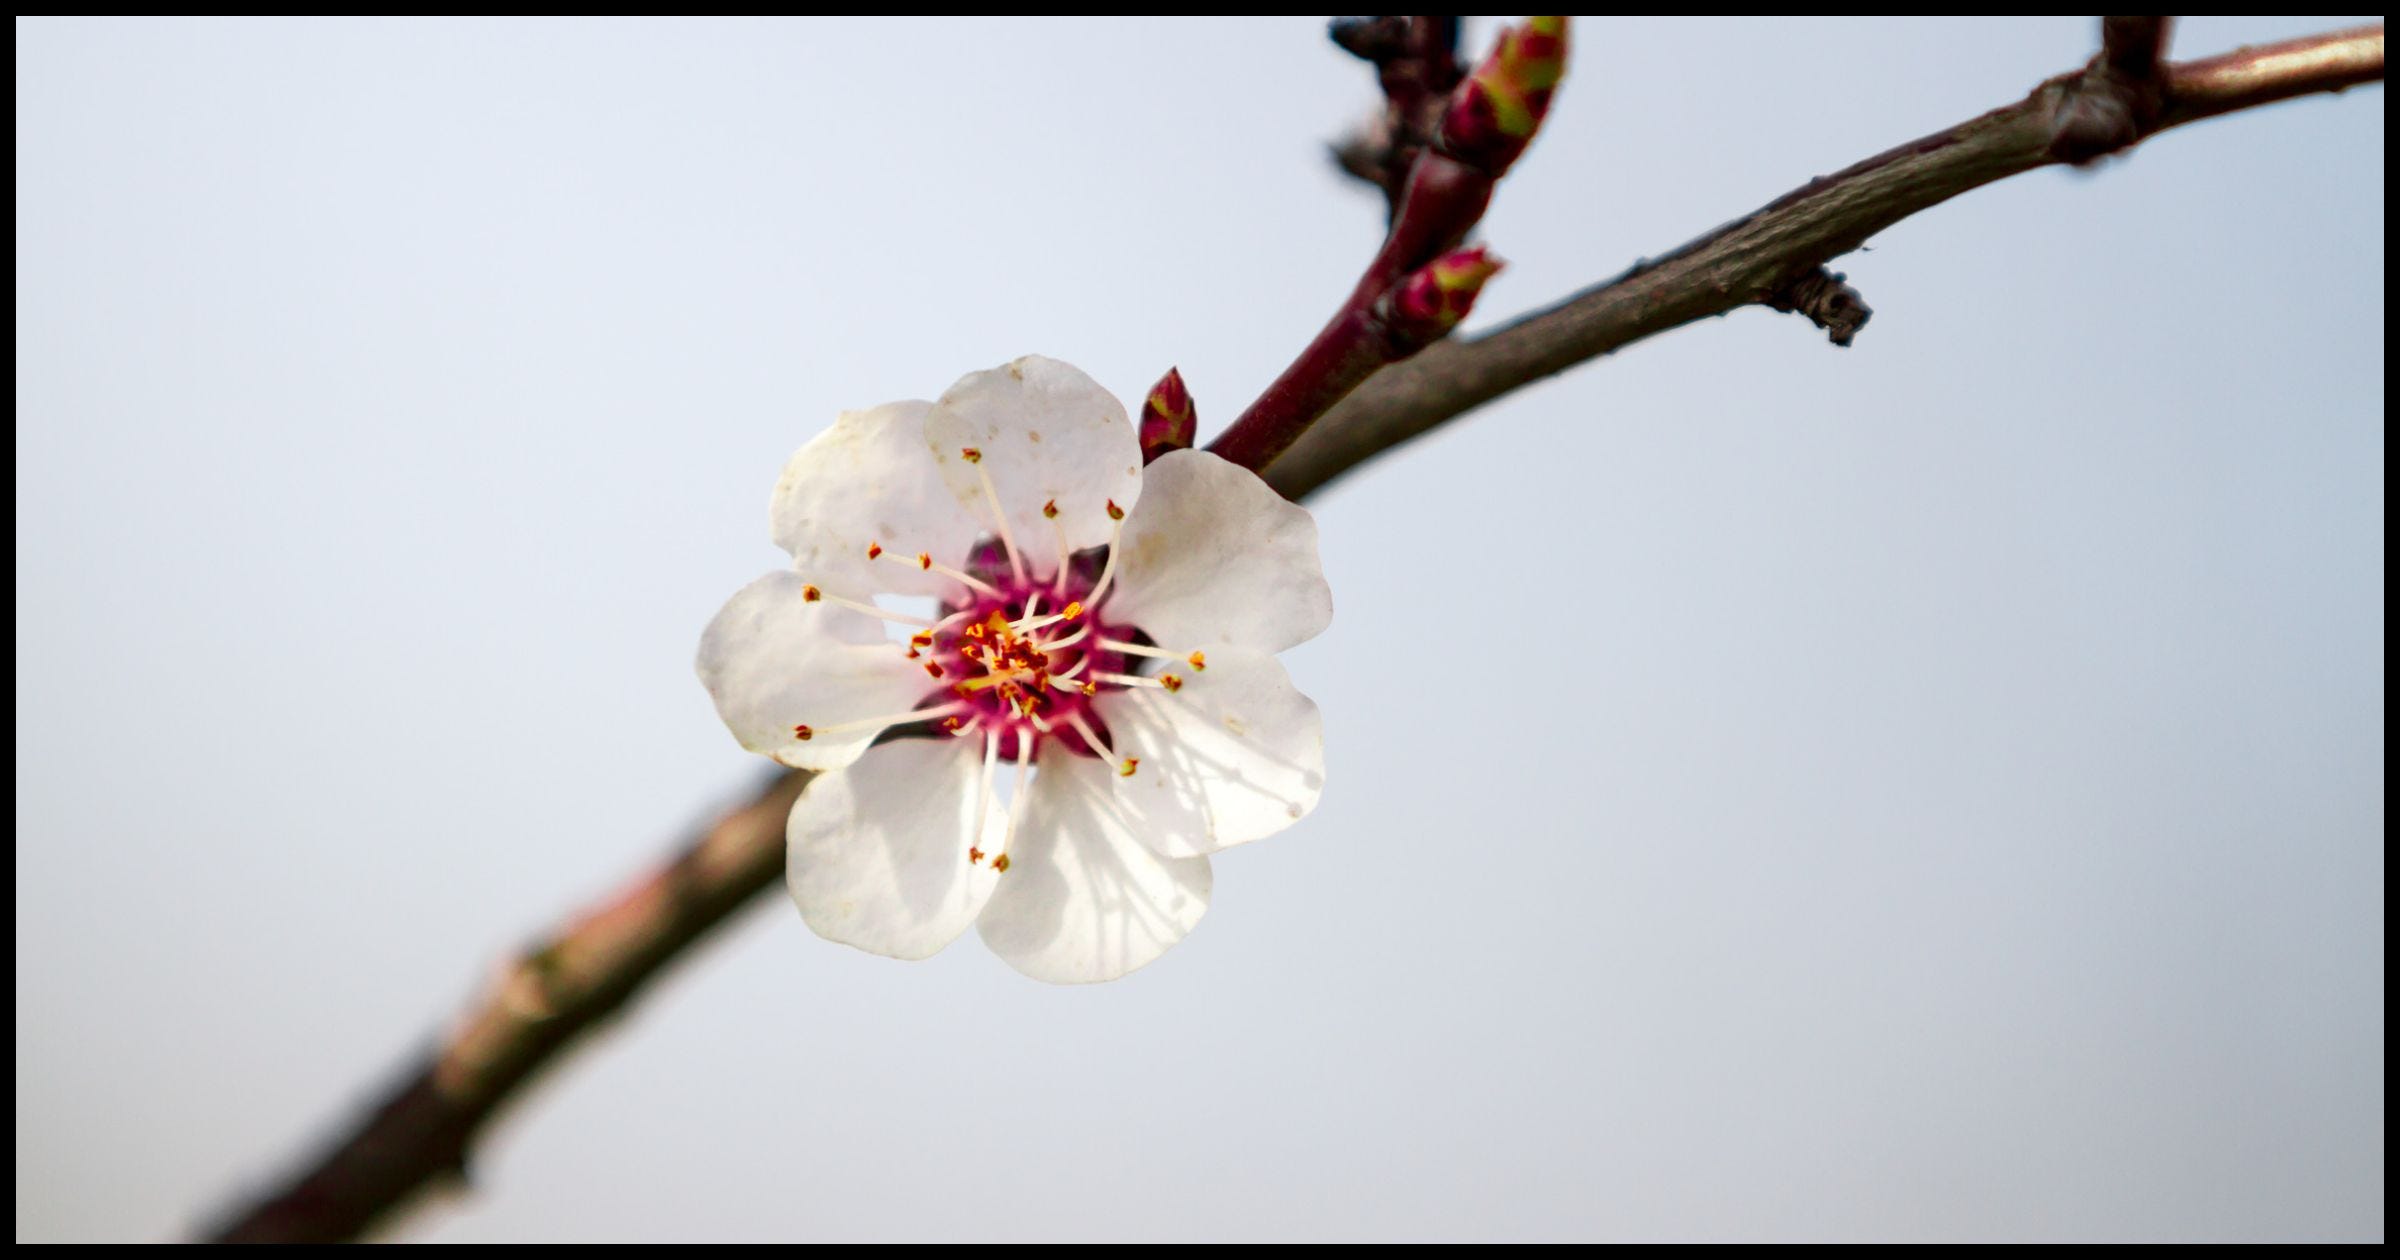 A flower blossoming on a branch.